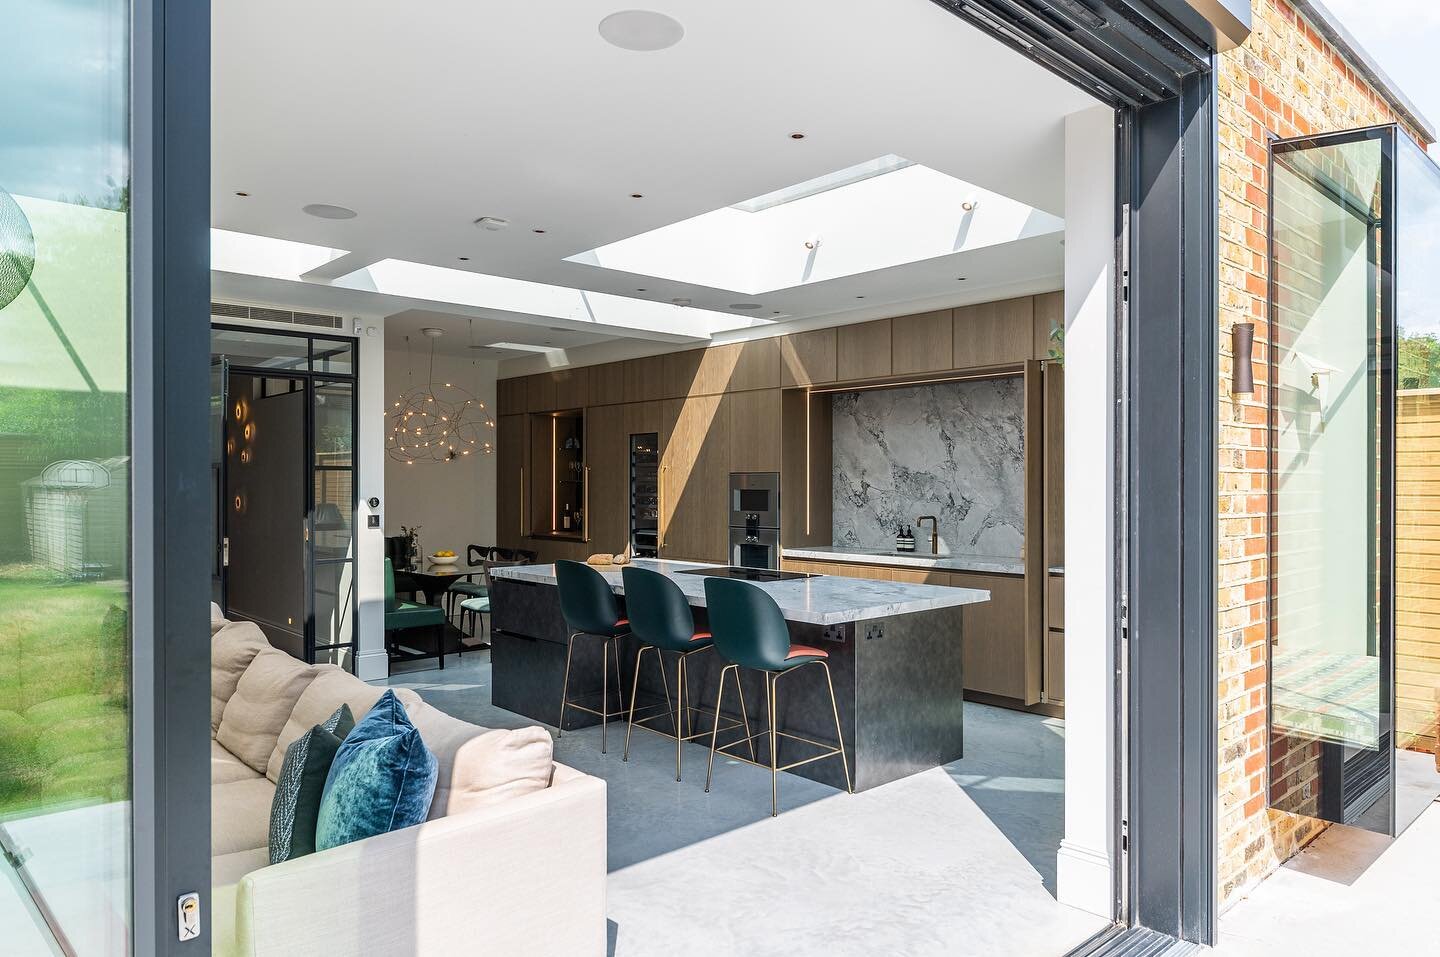 A recent collaboration highlighting an open plan kitchen and living space with super smart finishes.

Interior design: @colour_interiors_ltd 
Architect: @adearchitecture 
Kitchen: Eggersman by @suchdesignslondon 
Chairs: @gubiofficial 
Sofa: @sofadot